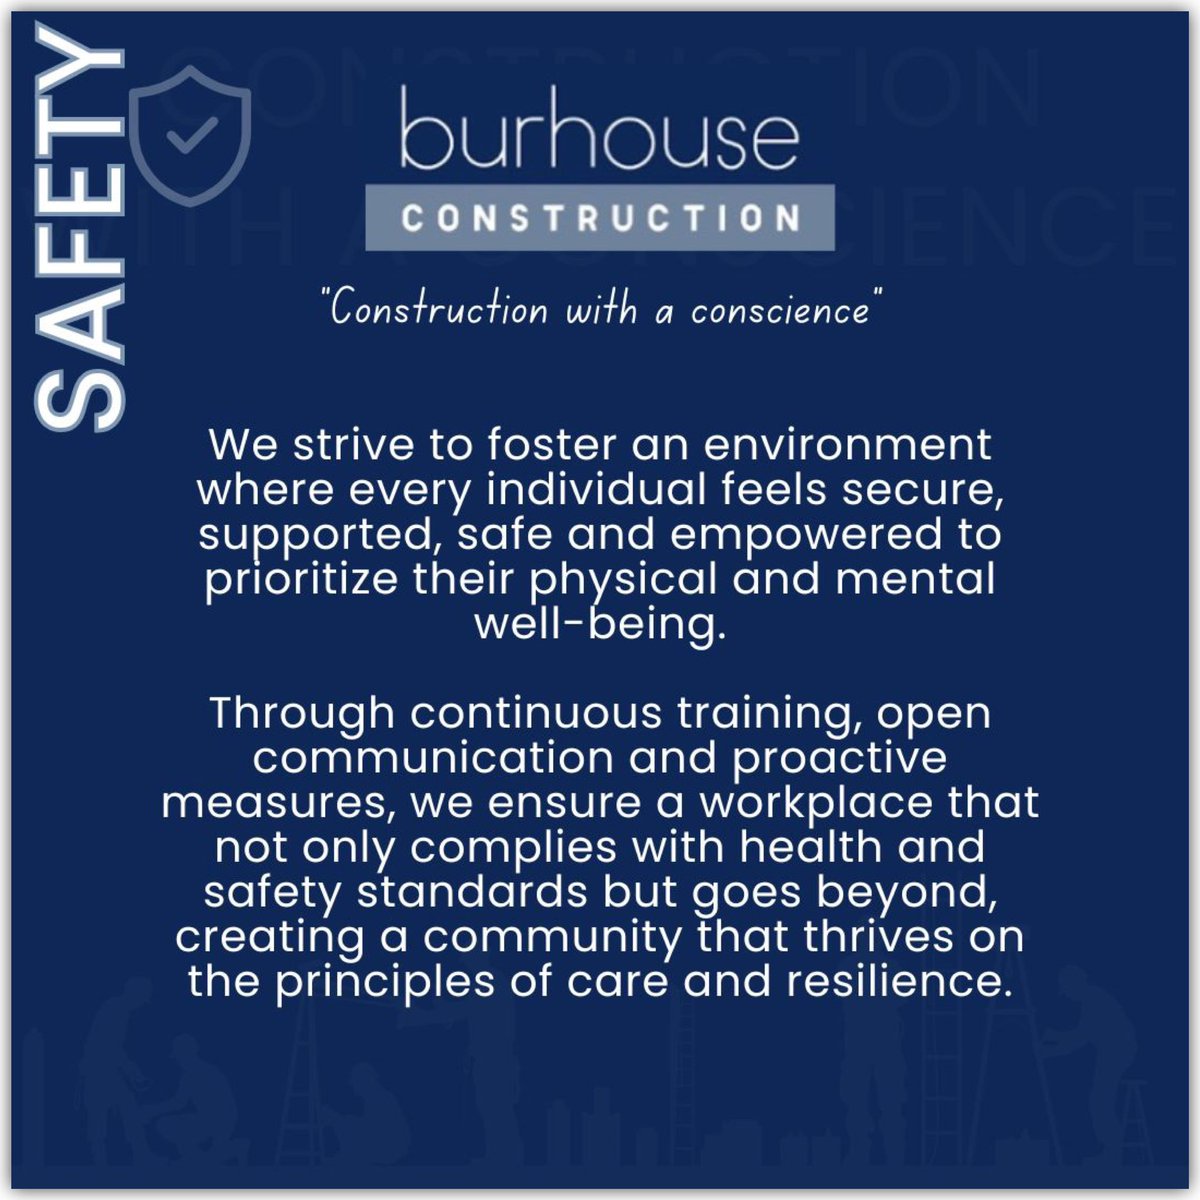 1/2 We strive to foster an environment where every individual feels secure, supported, safe and empowered to prioritize their physical and mental well-being. 

#BurhouseConstruction 
#ConstructionWithAConscience 

#EthicalPractices #Transparency #BuildingExcellence